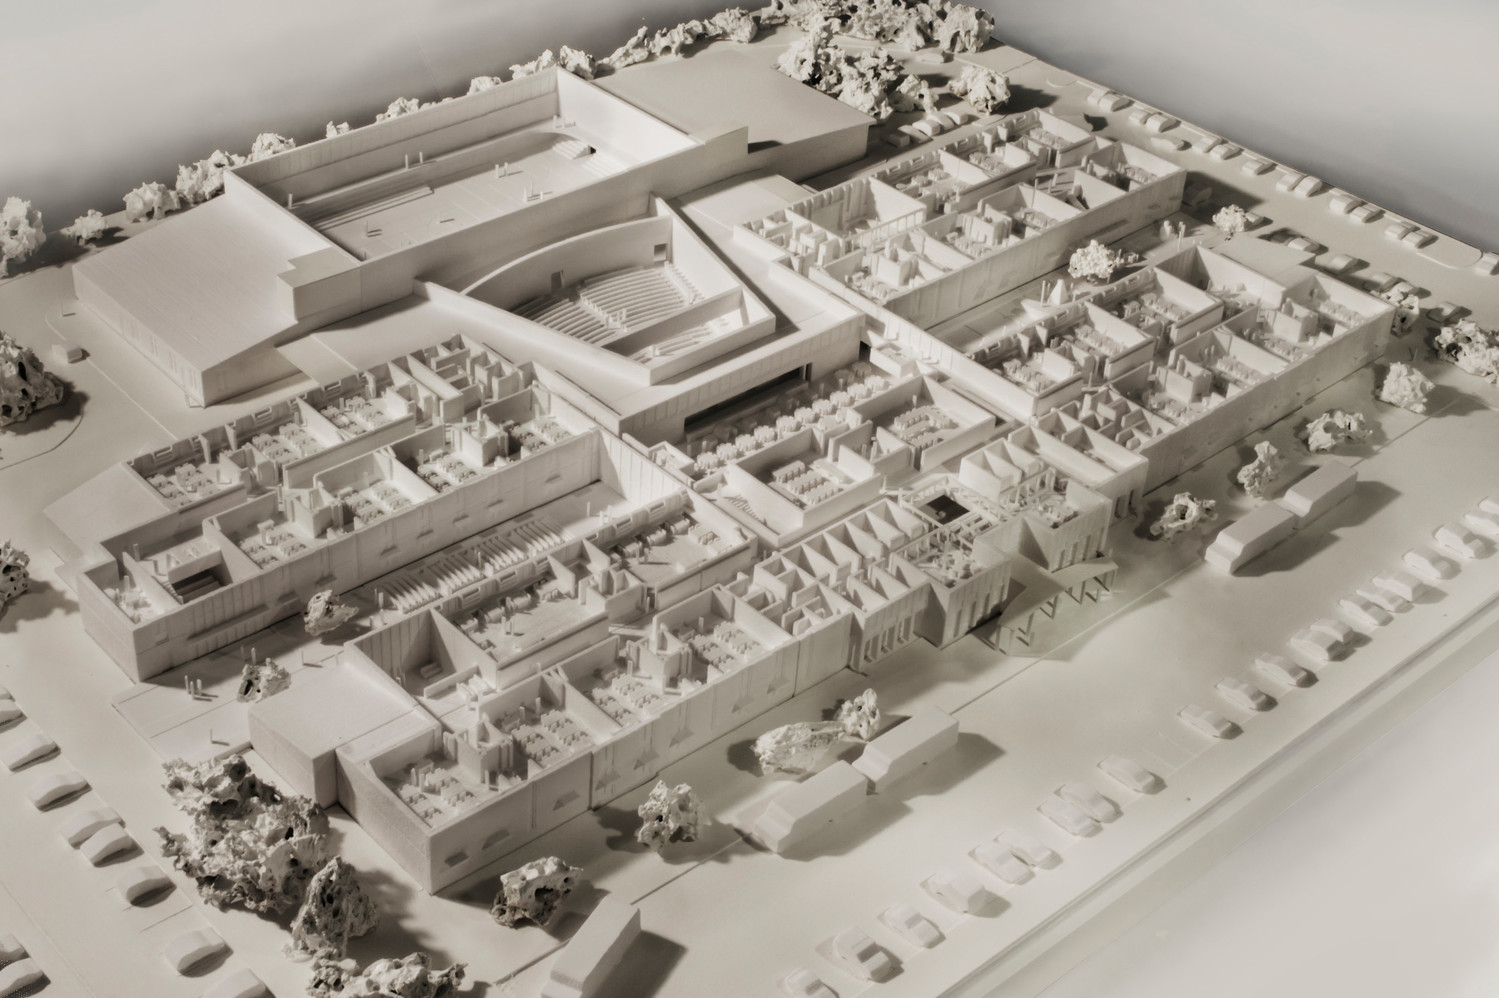 A model of the proposed grade 5-12 school to be built on the site of the contaminated Westport Middle School